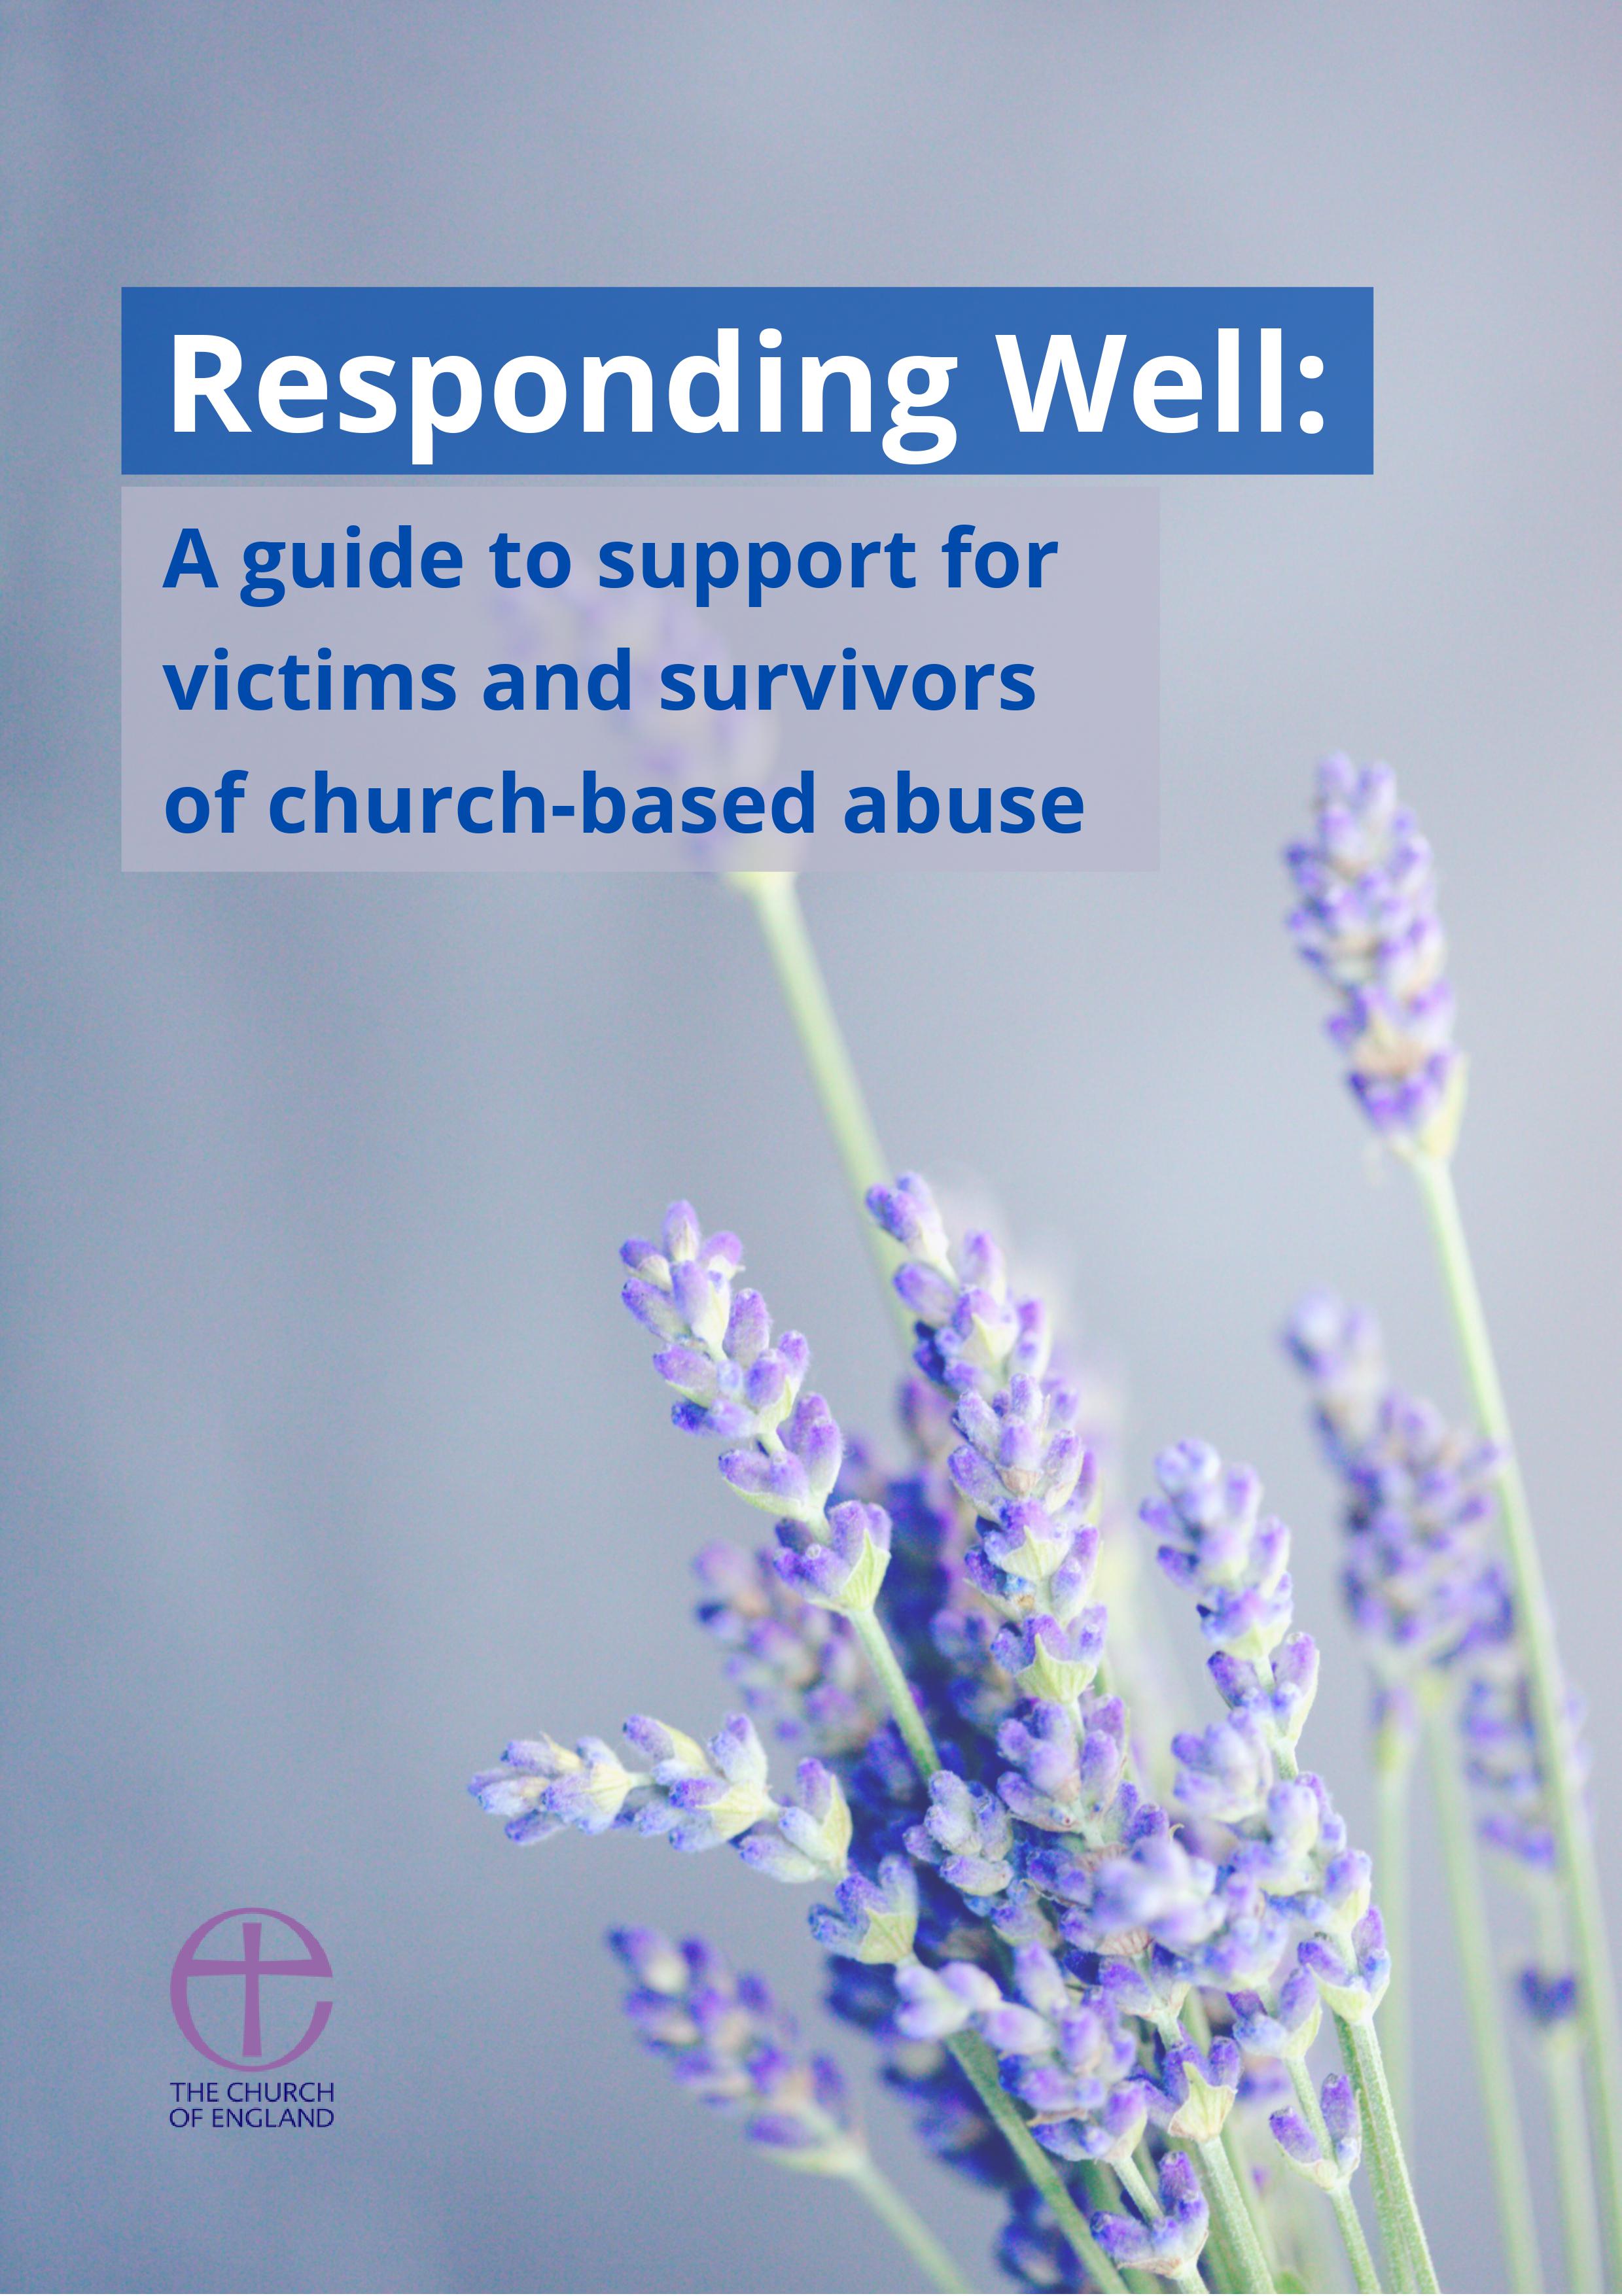 Front cover of a booklet from the Church of England entitled Responding Well: A guide to support for victims and survivors of church-based abuse